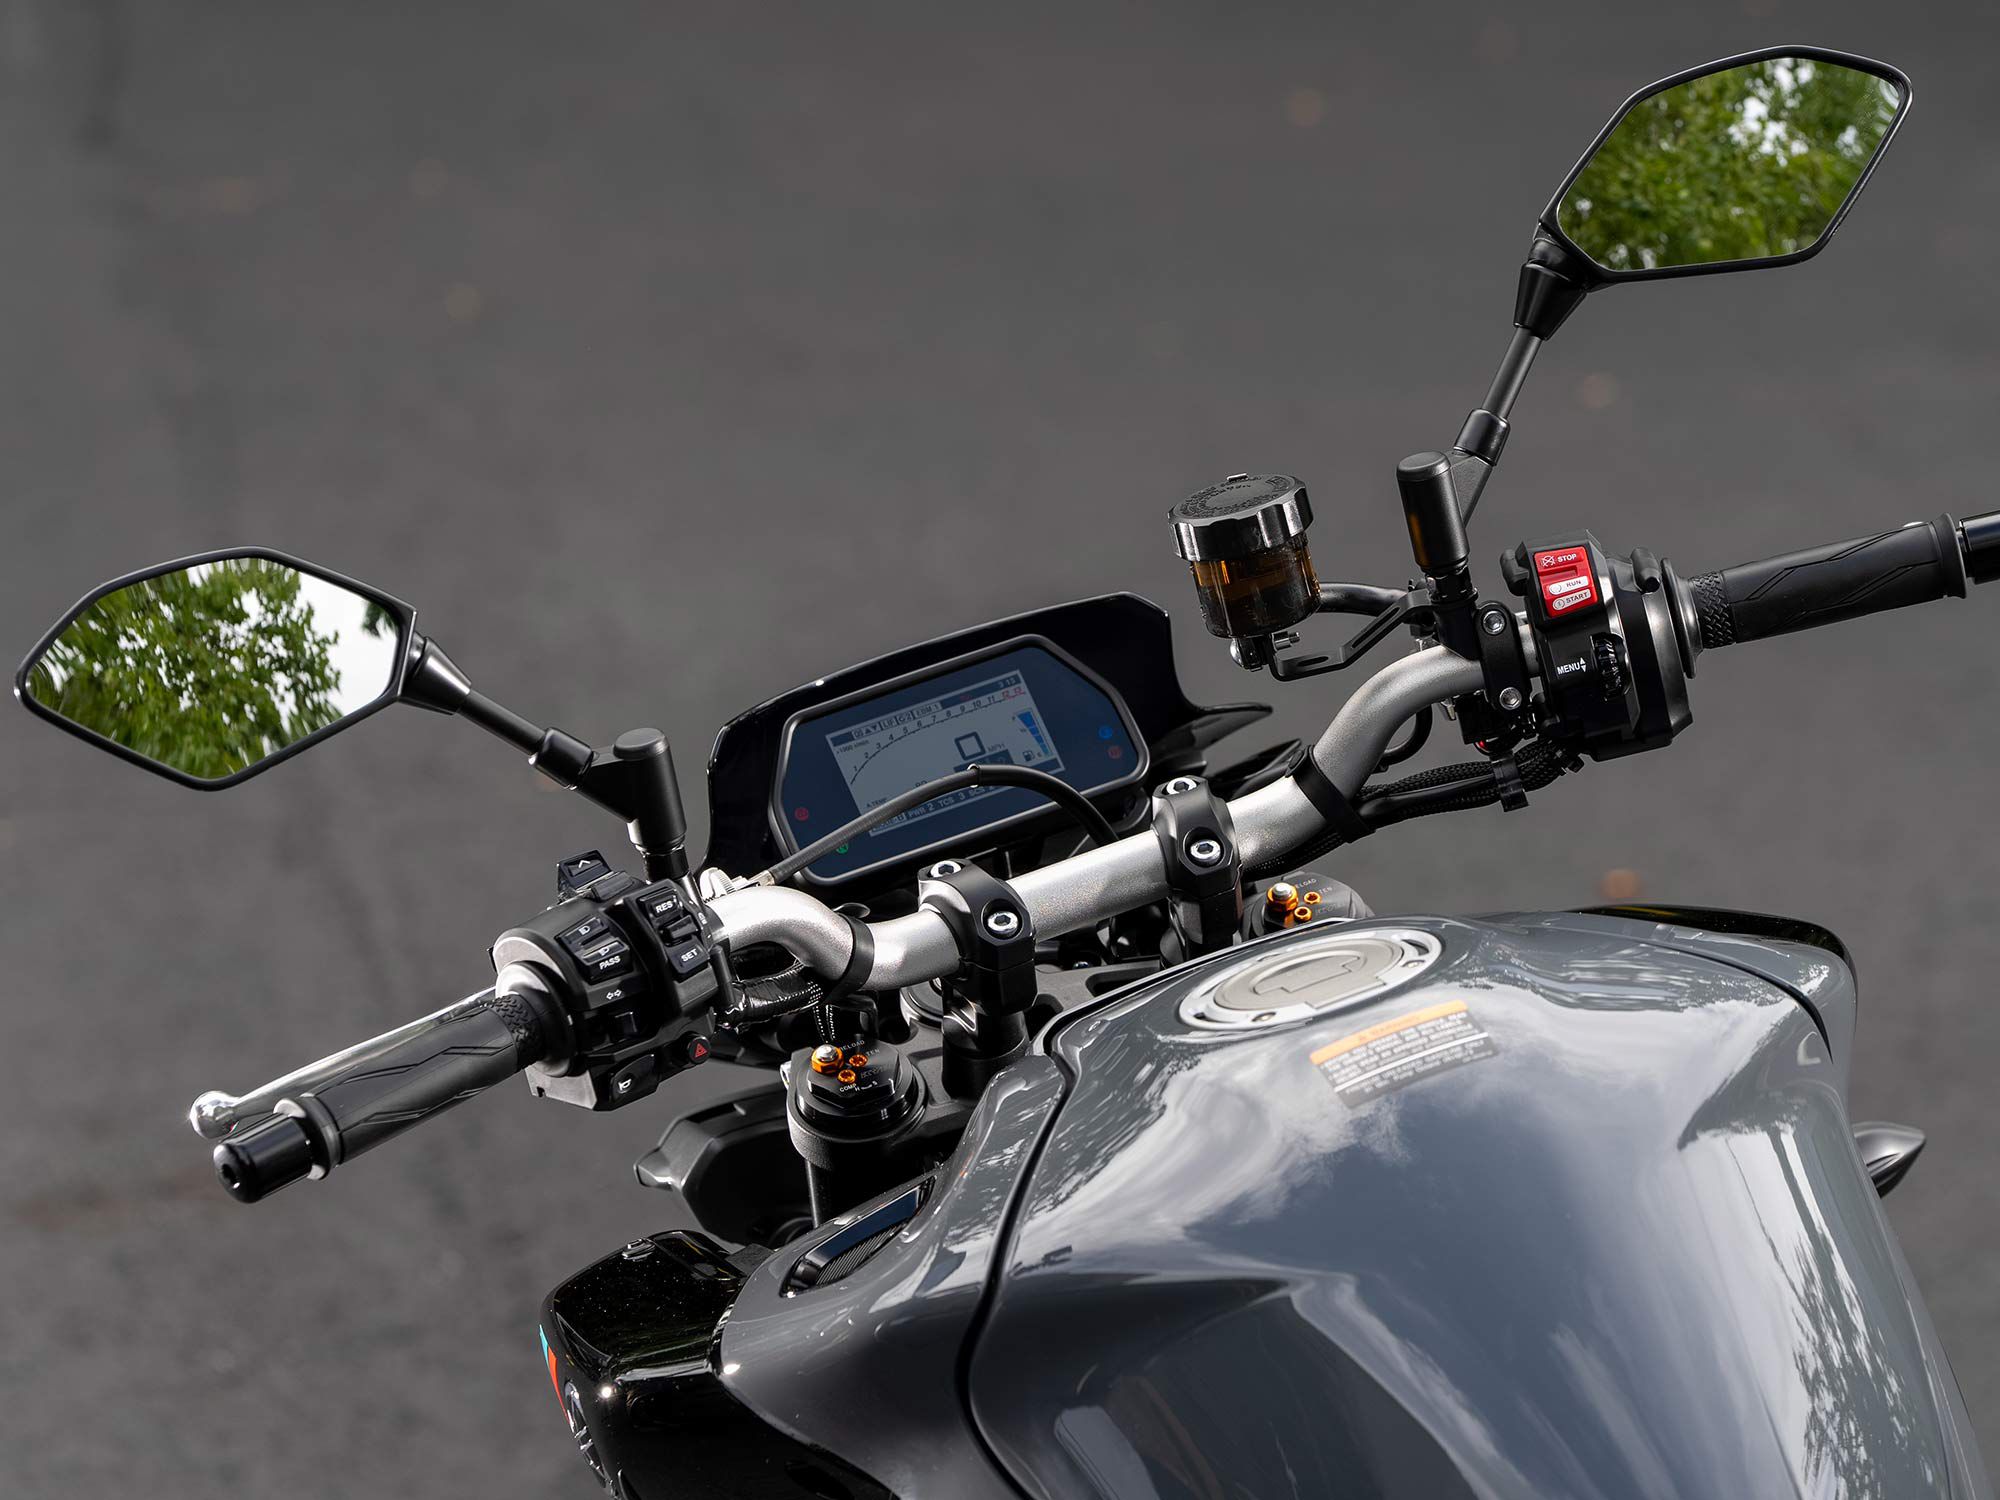 The MT-10 wears the YZF-R1’s color TFT dash. While it was class-leading when the iPhone 5–sized display debuted, now it appears small.